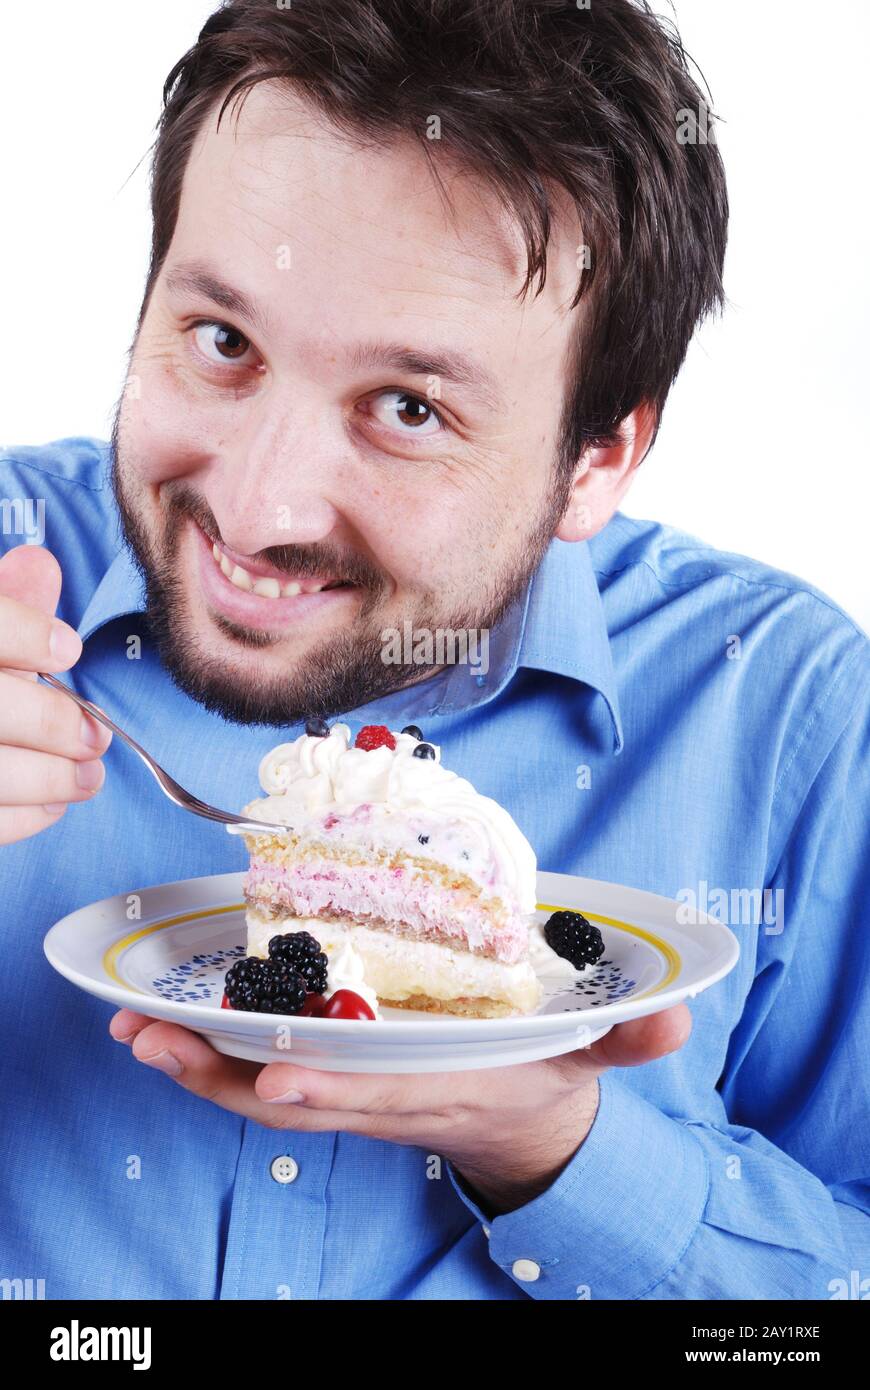 Young man eating cake Stock Photo